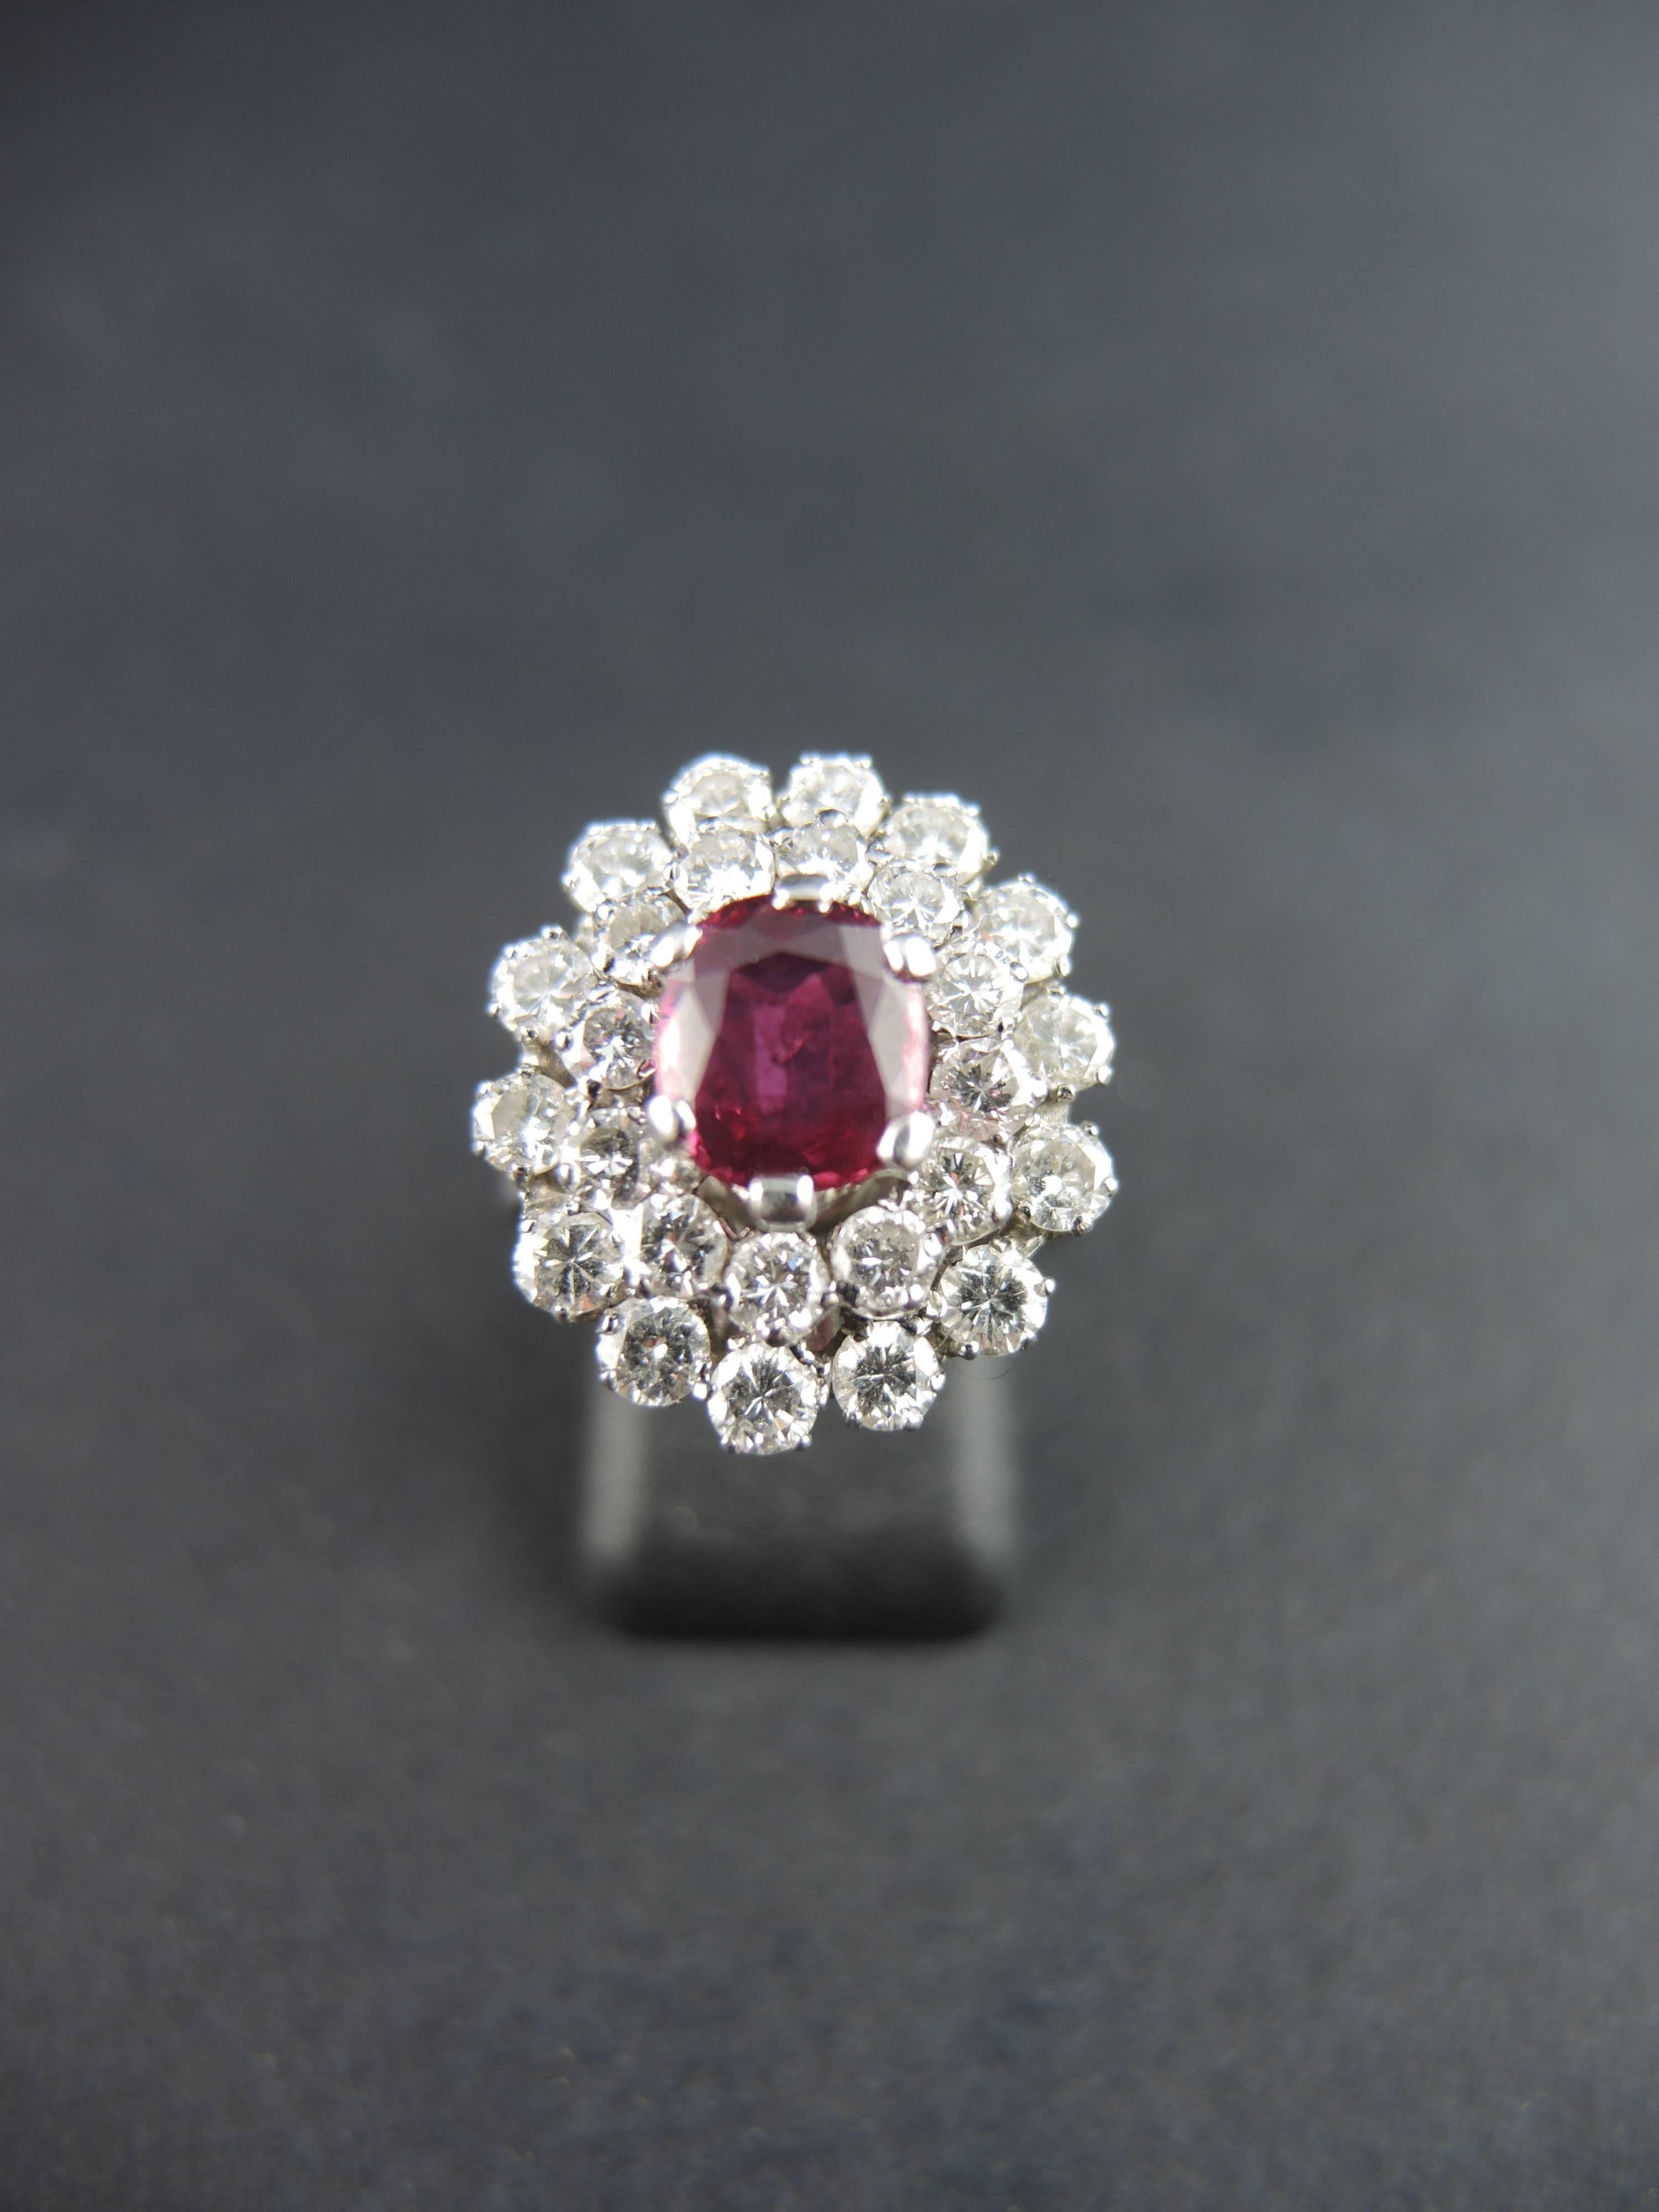 18kt white gold cluster ring (quality mark: owl) set with an oval ruby, weighting apx 1,00 ct, surrounded with two ranks of modern cut diamonds, total weight estimated around 2,10 cts.

Circa 1980.

Weight: 6,70g
Ring size: 51 (diameter 16,25 / US